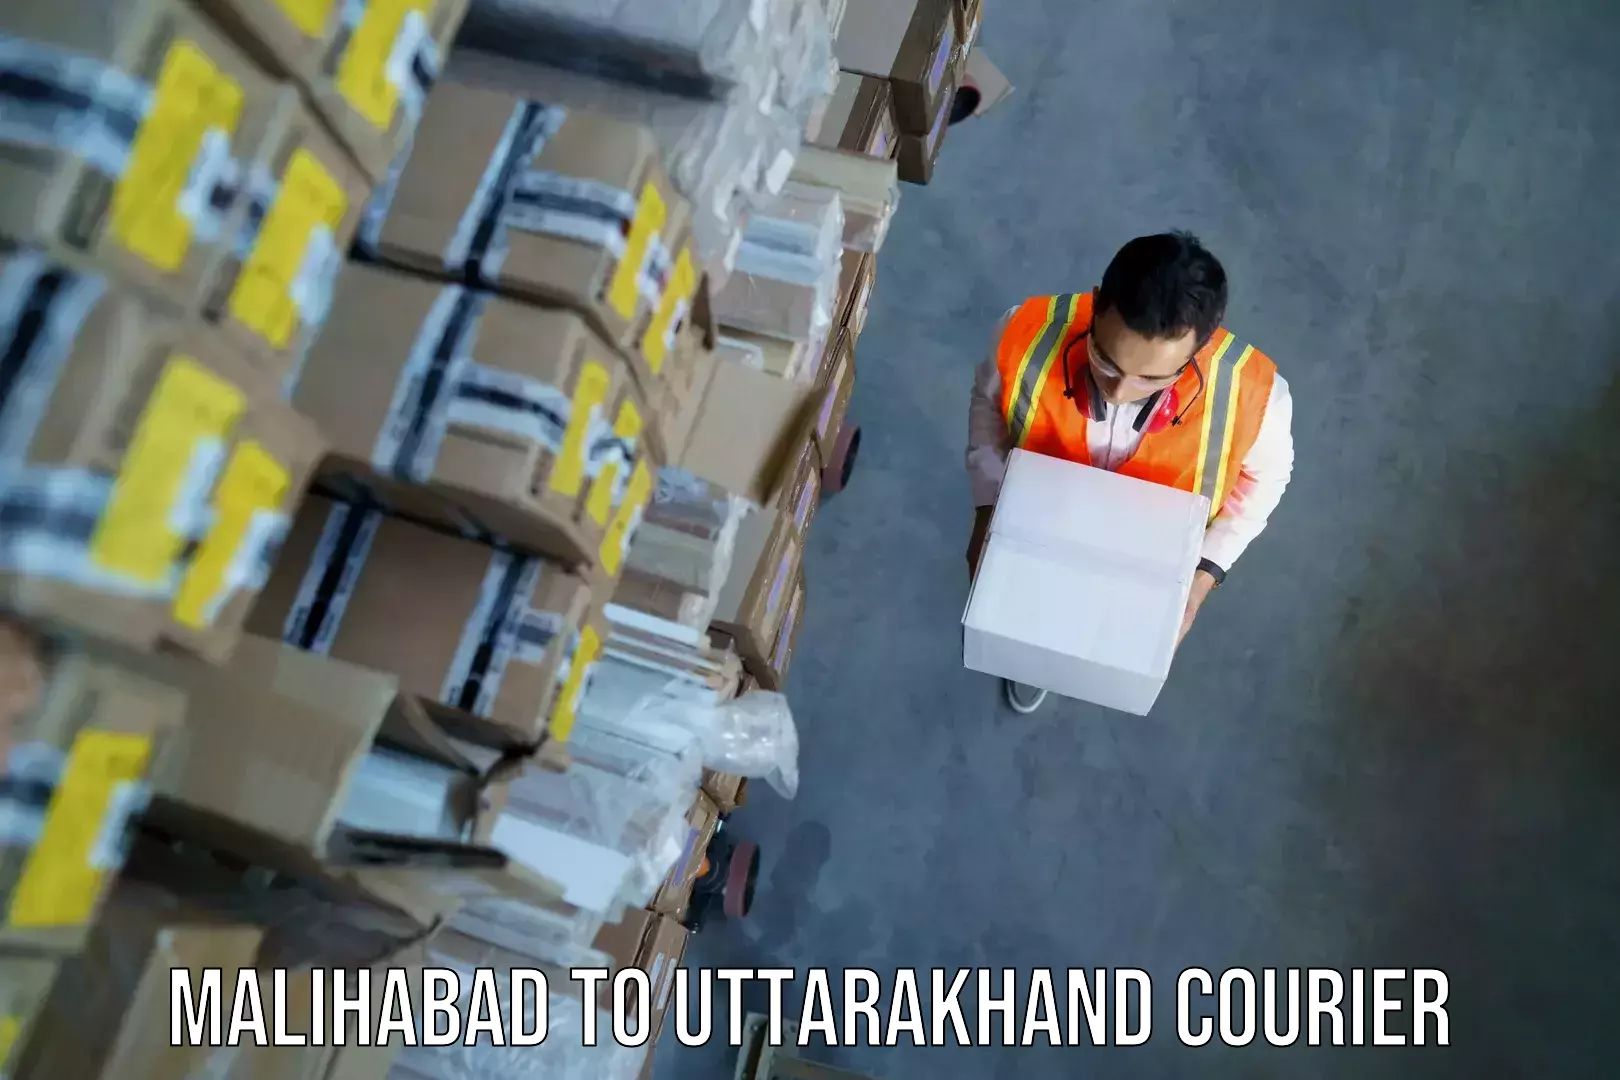 Baggage relocation service Malihabad to IIT Roorkee